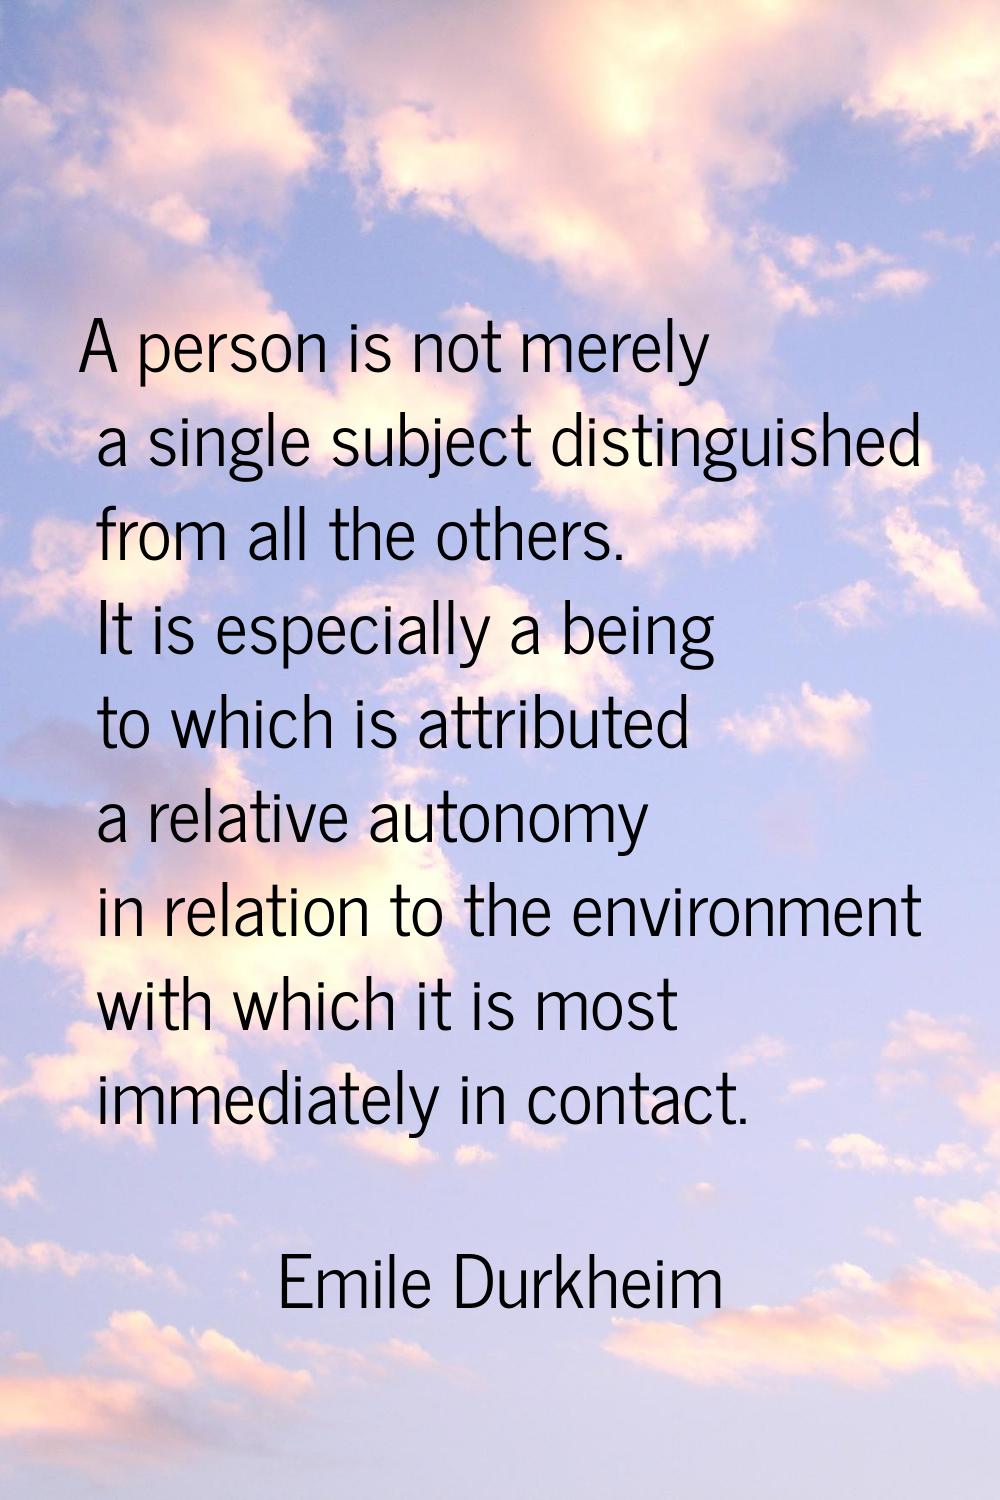 A person is not merely a single subject distinguished from all the others. It is especially a being